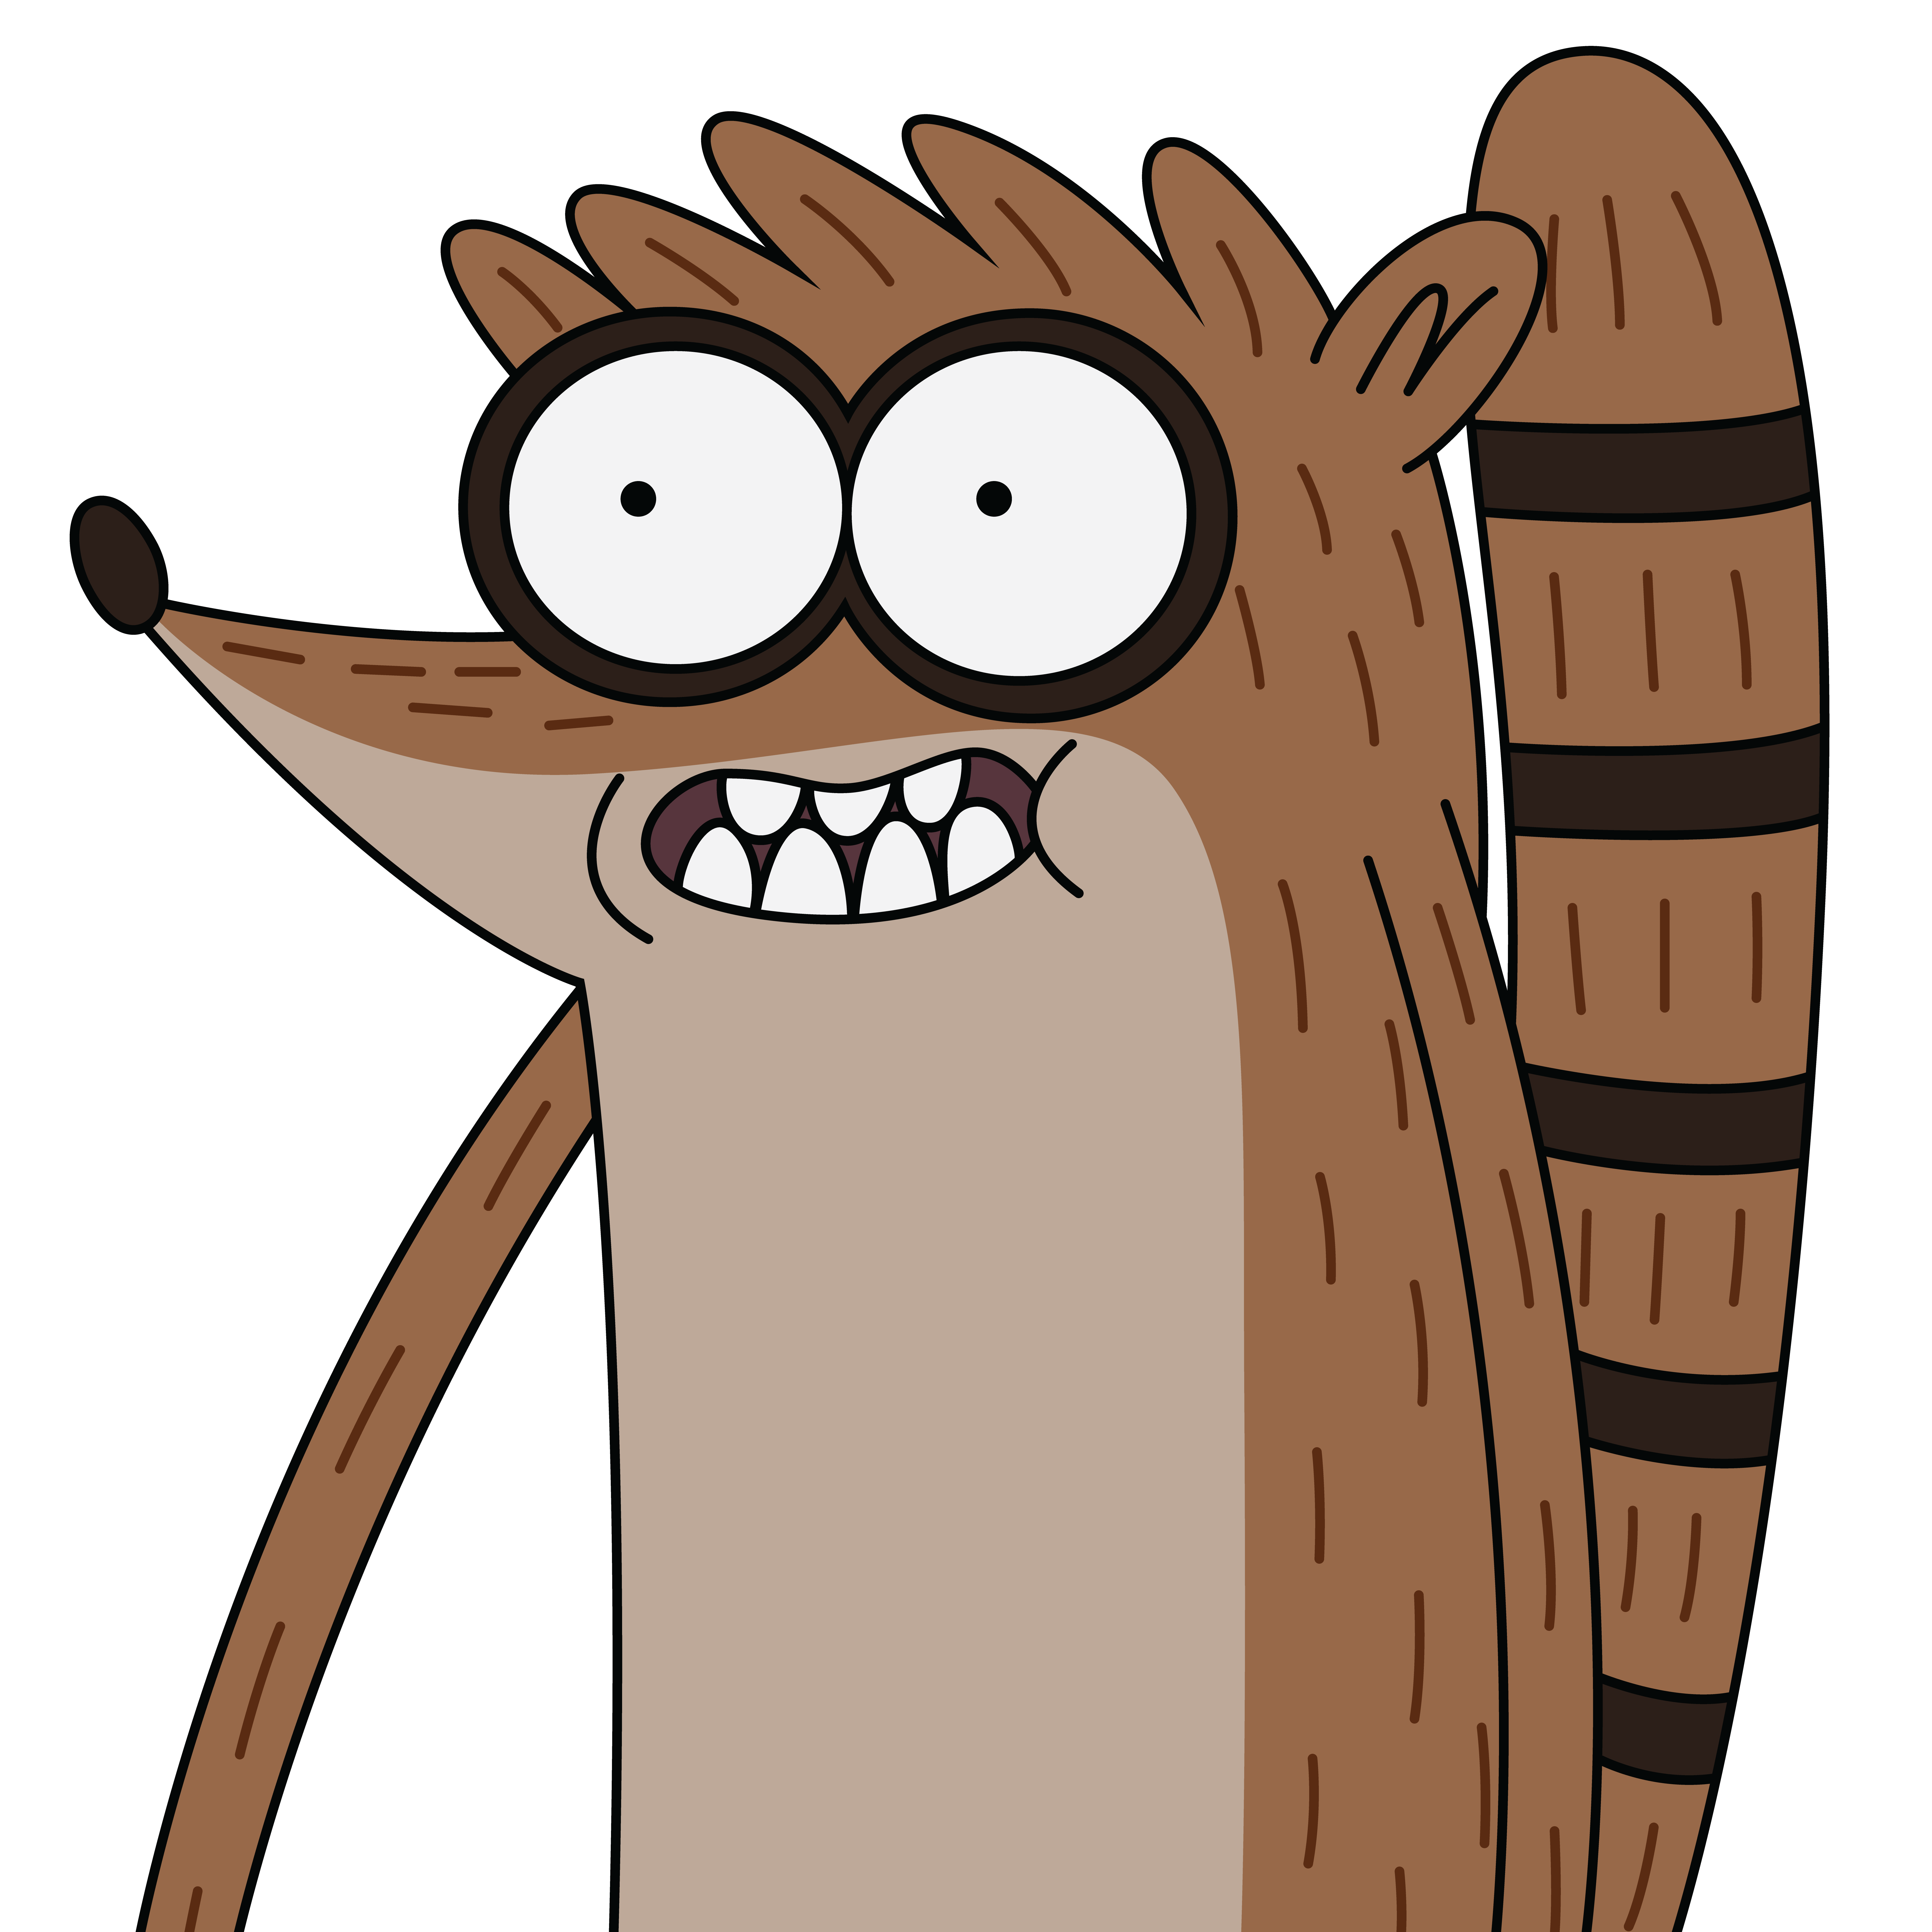 Rigby vector image from Regular Show render